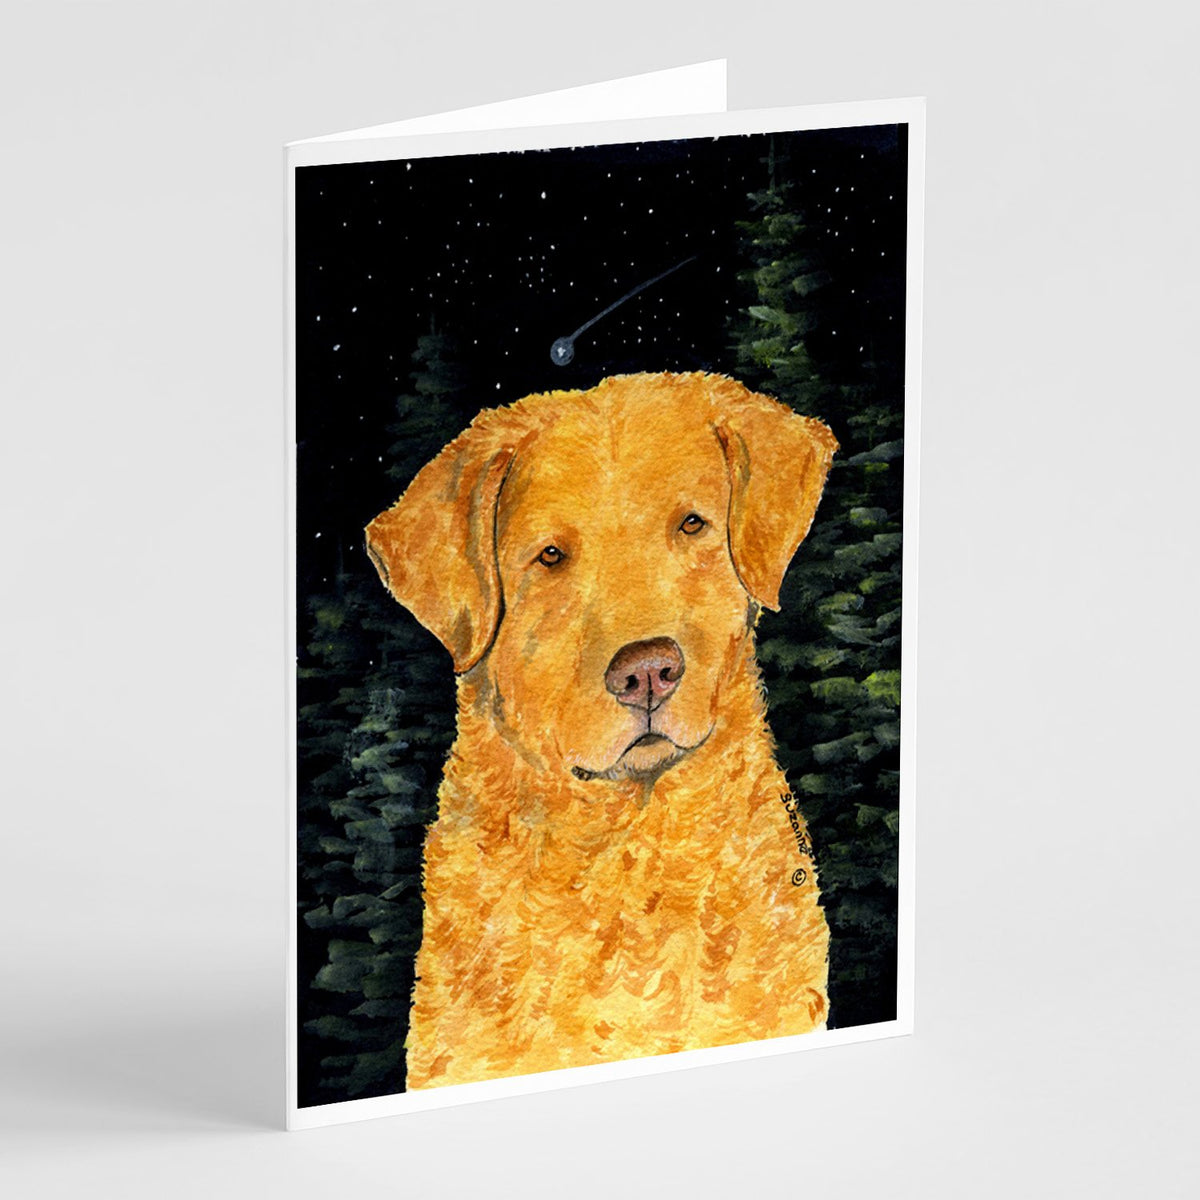 Buy this Starry Night Chesapeake Bay Retriever Greeting Cards and Envelopes Pack of 8